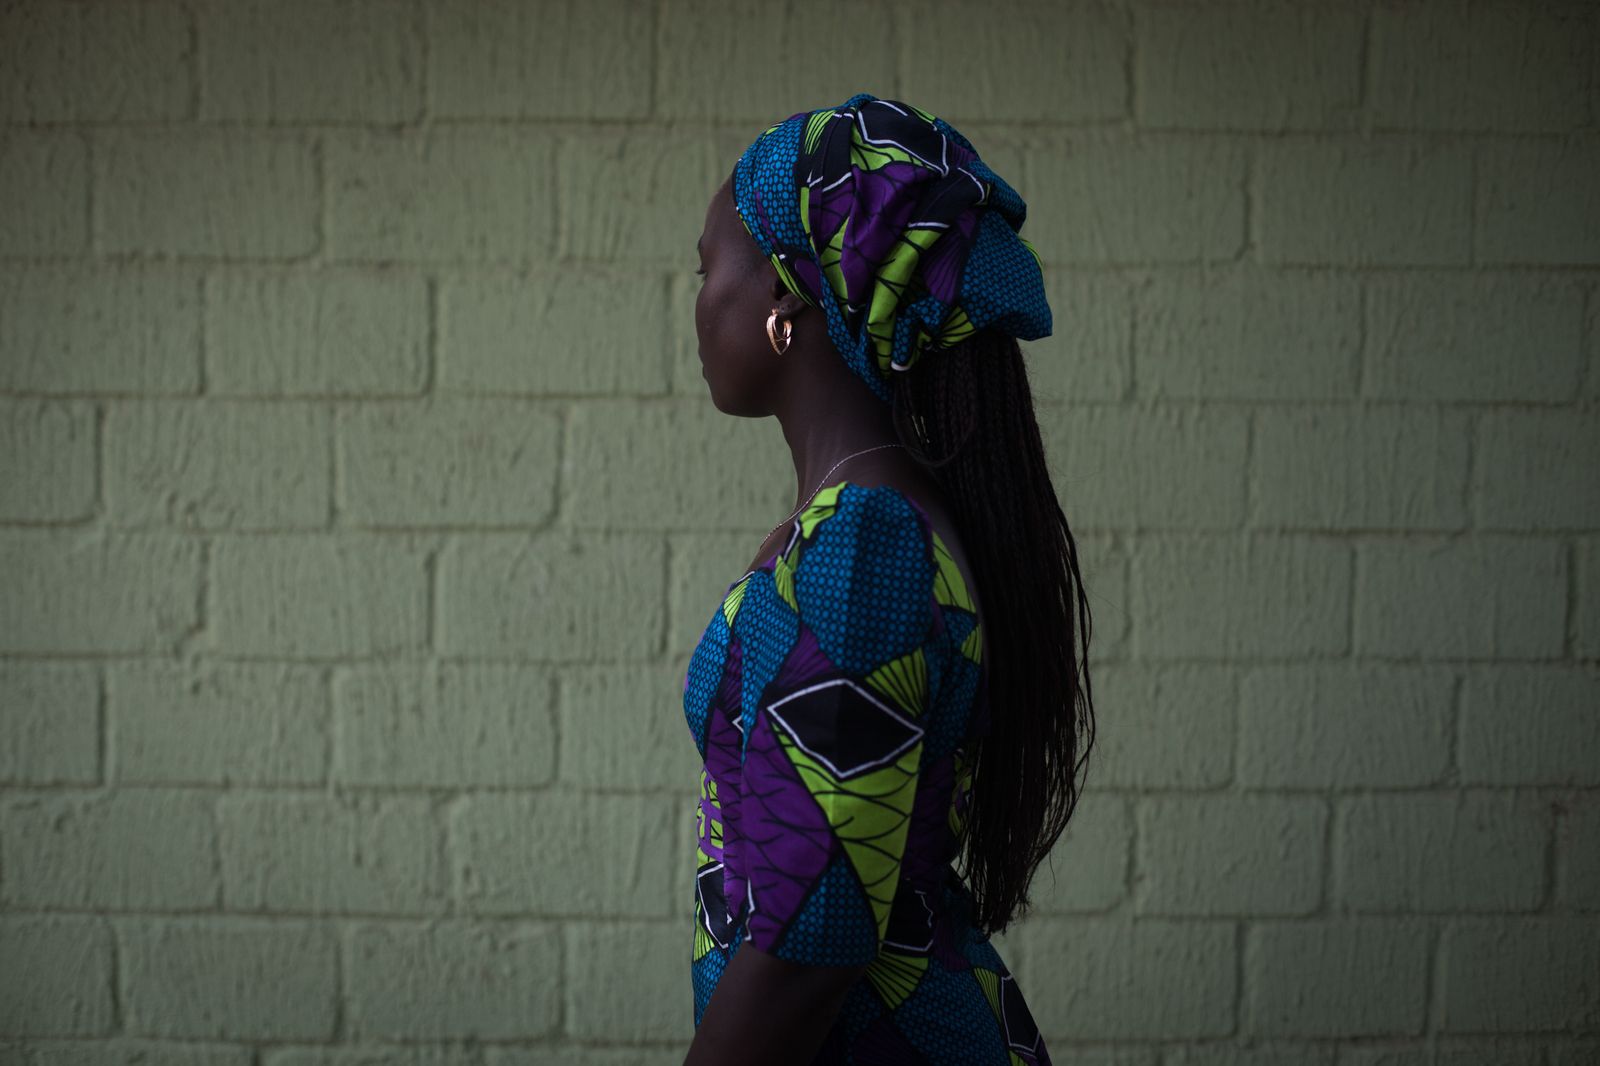 © Ruth McDowall - Image from the Malaiku - Survivors of boko haram abduction photography project